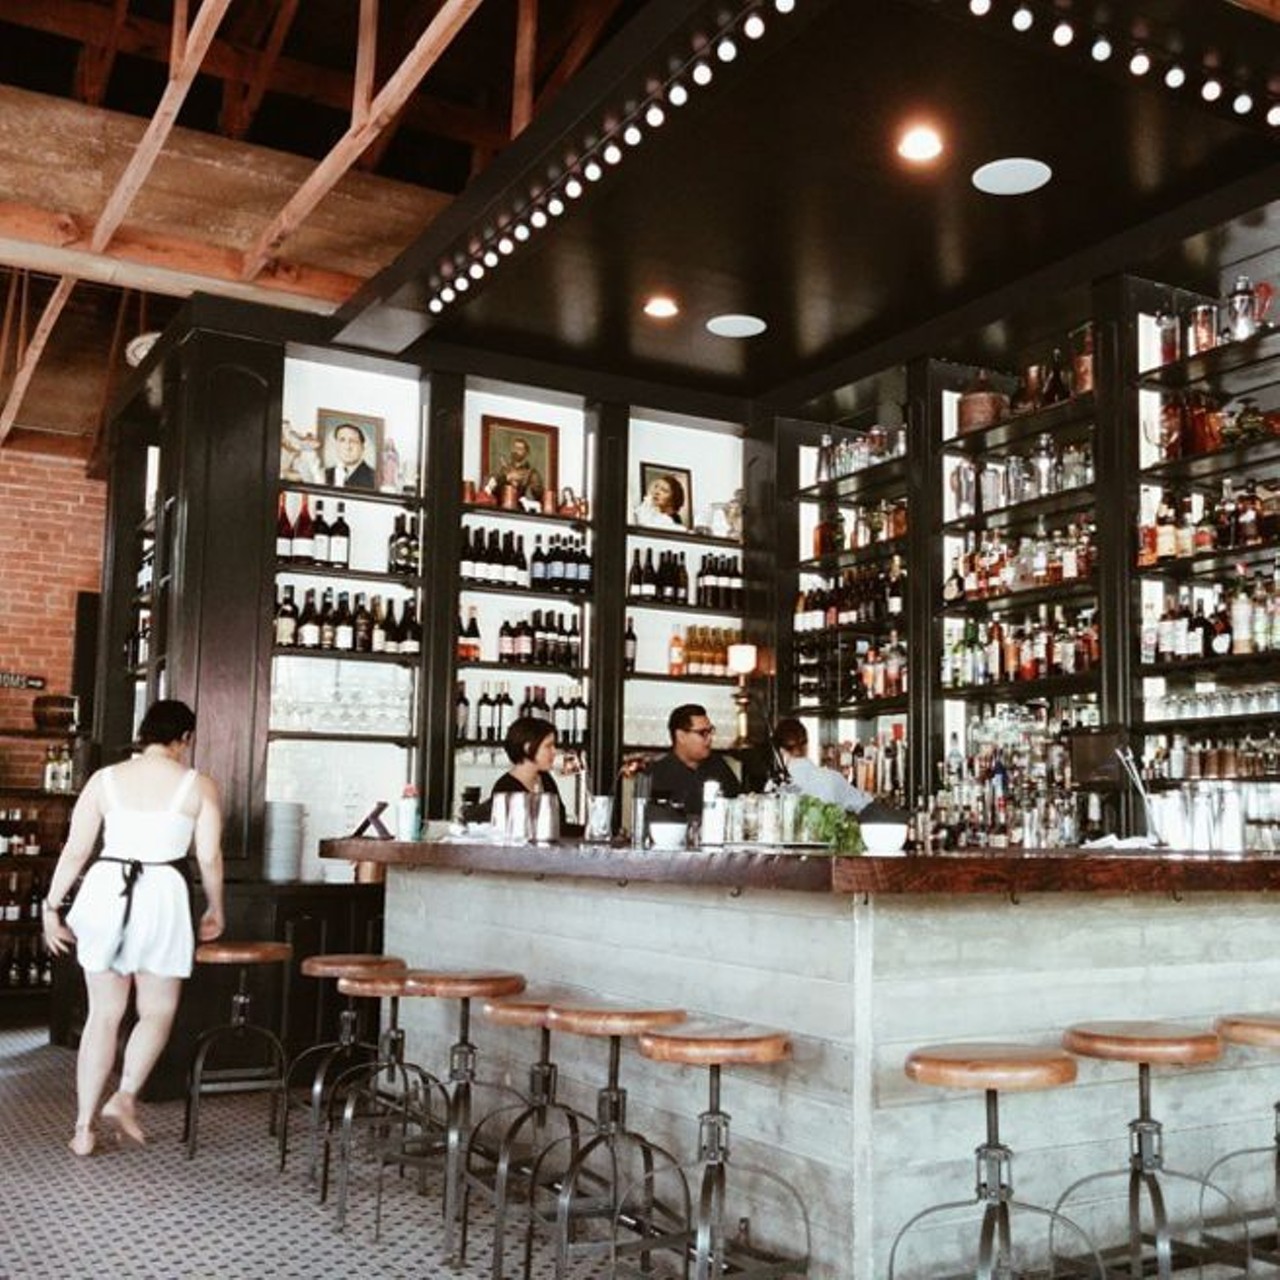 Barbaro
2720 McCullough Ave., (210) 320-2261
Barbaro is the perfect location for a pre-dinner cocktail, antipasto, dinner, dessert and nightcap. And the atmosphere is great for doing it all alone.
Photo via Instagram, royaltheartist